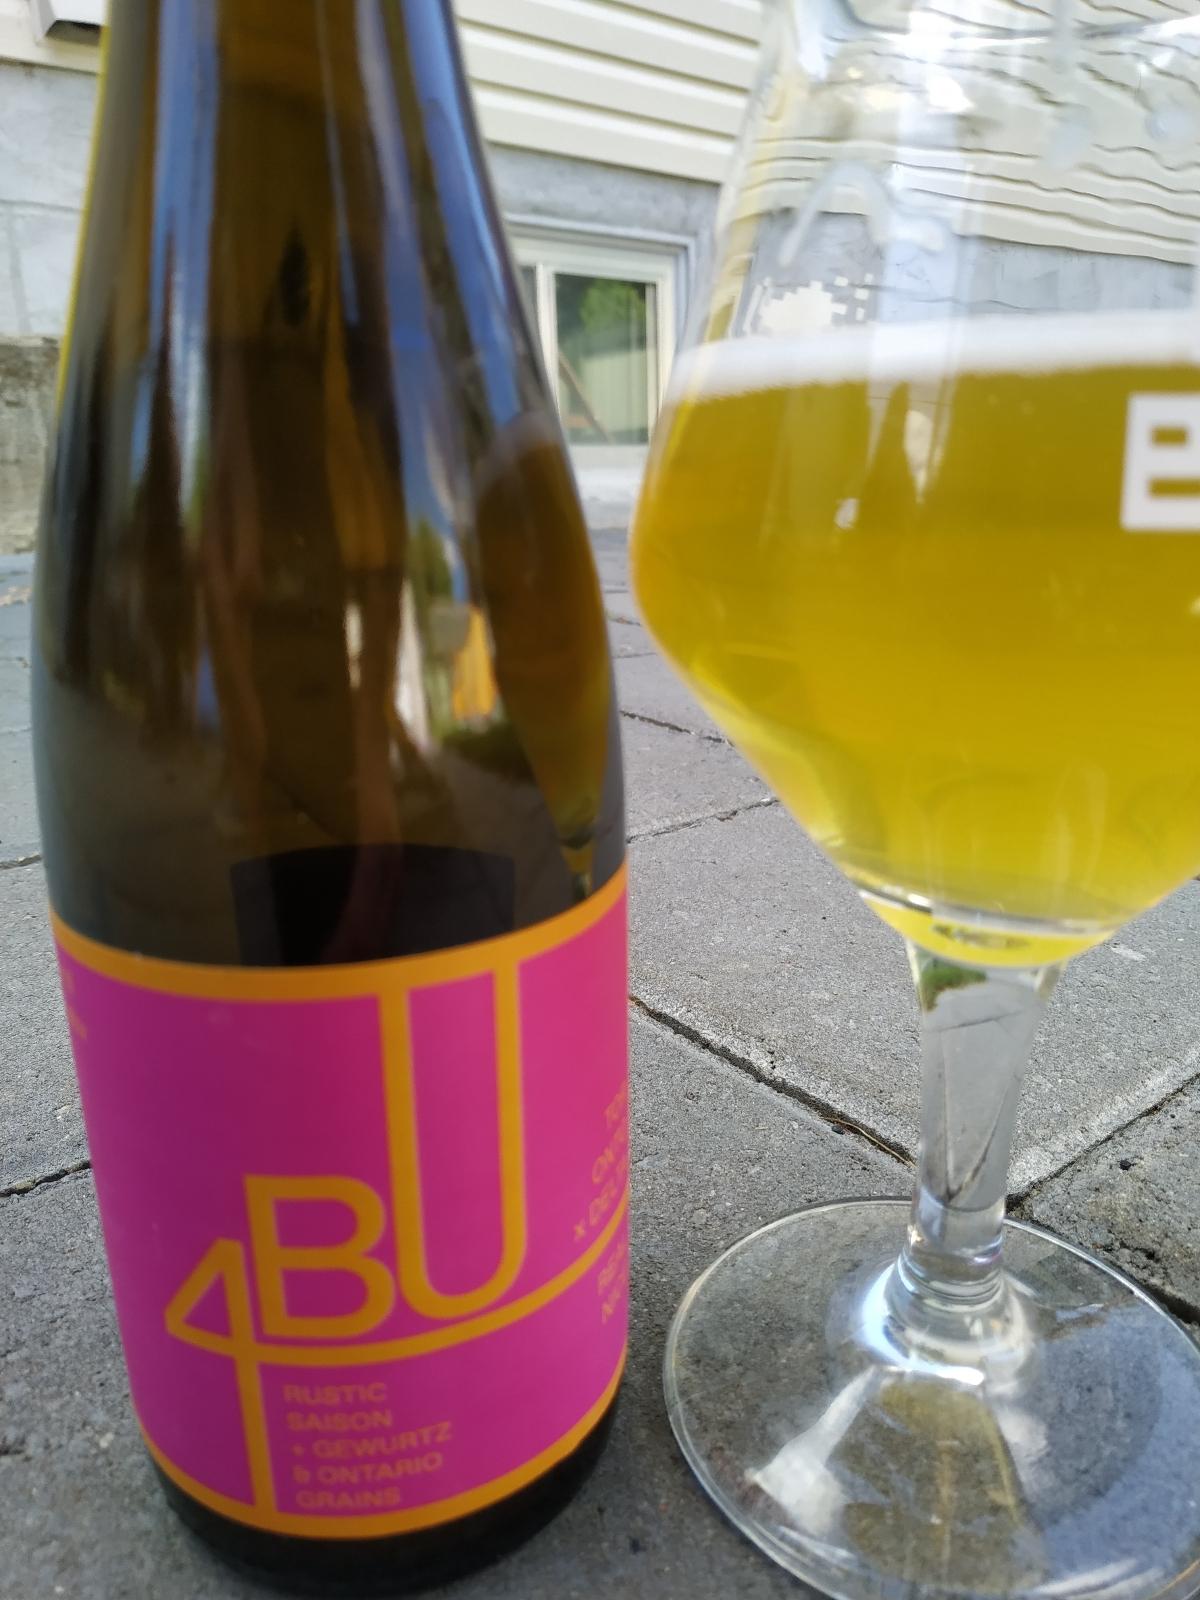 4BU (Collaboration with Four Winds Brewing)